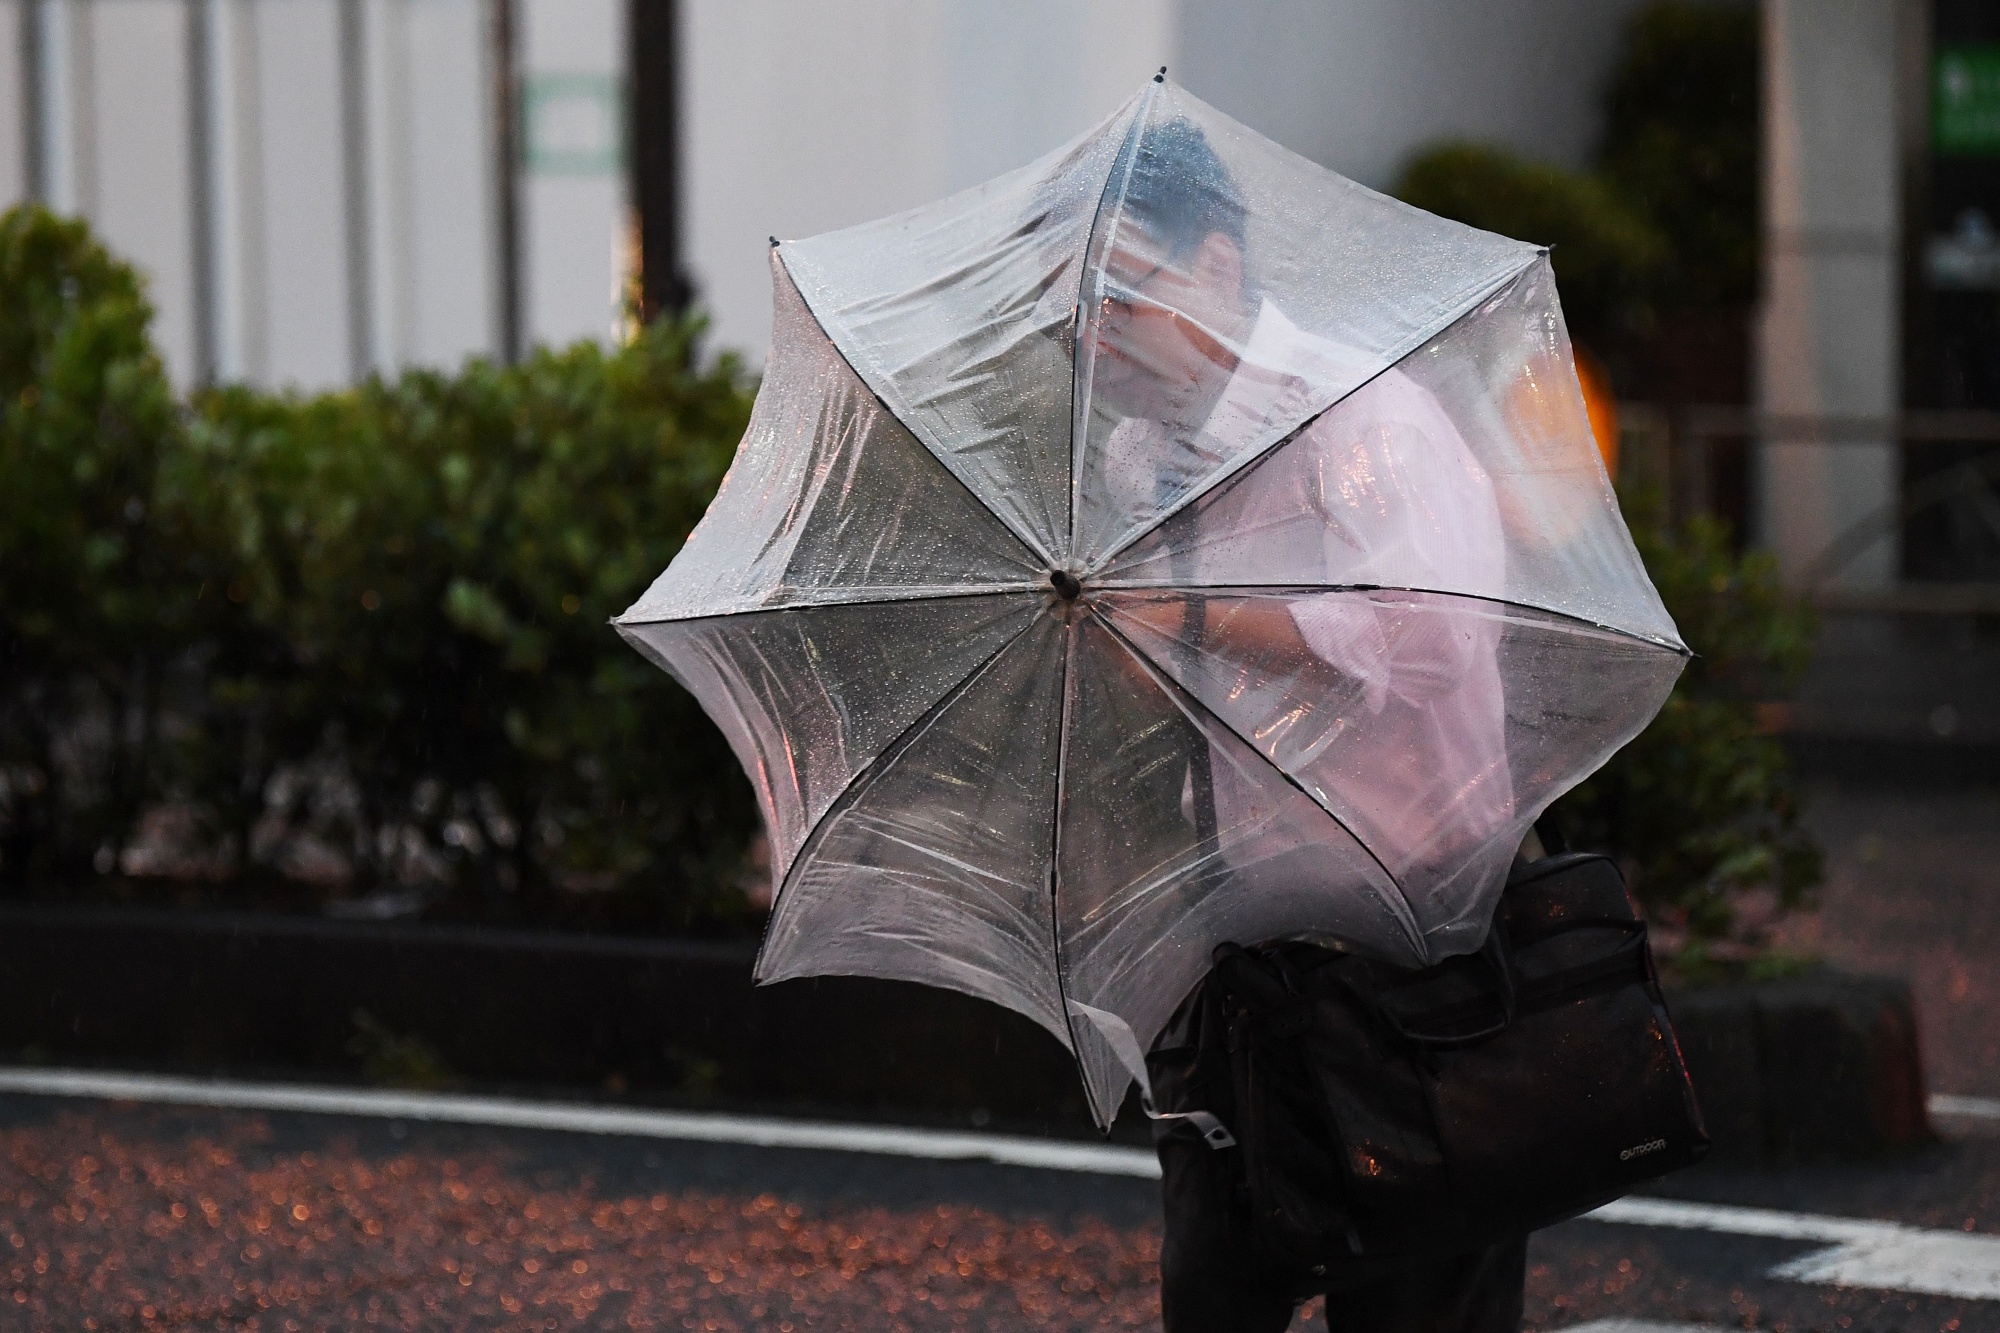 Sweltering Tokyo Braces for Approach of Typhoon Shanshan - Bloomberg